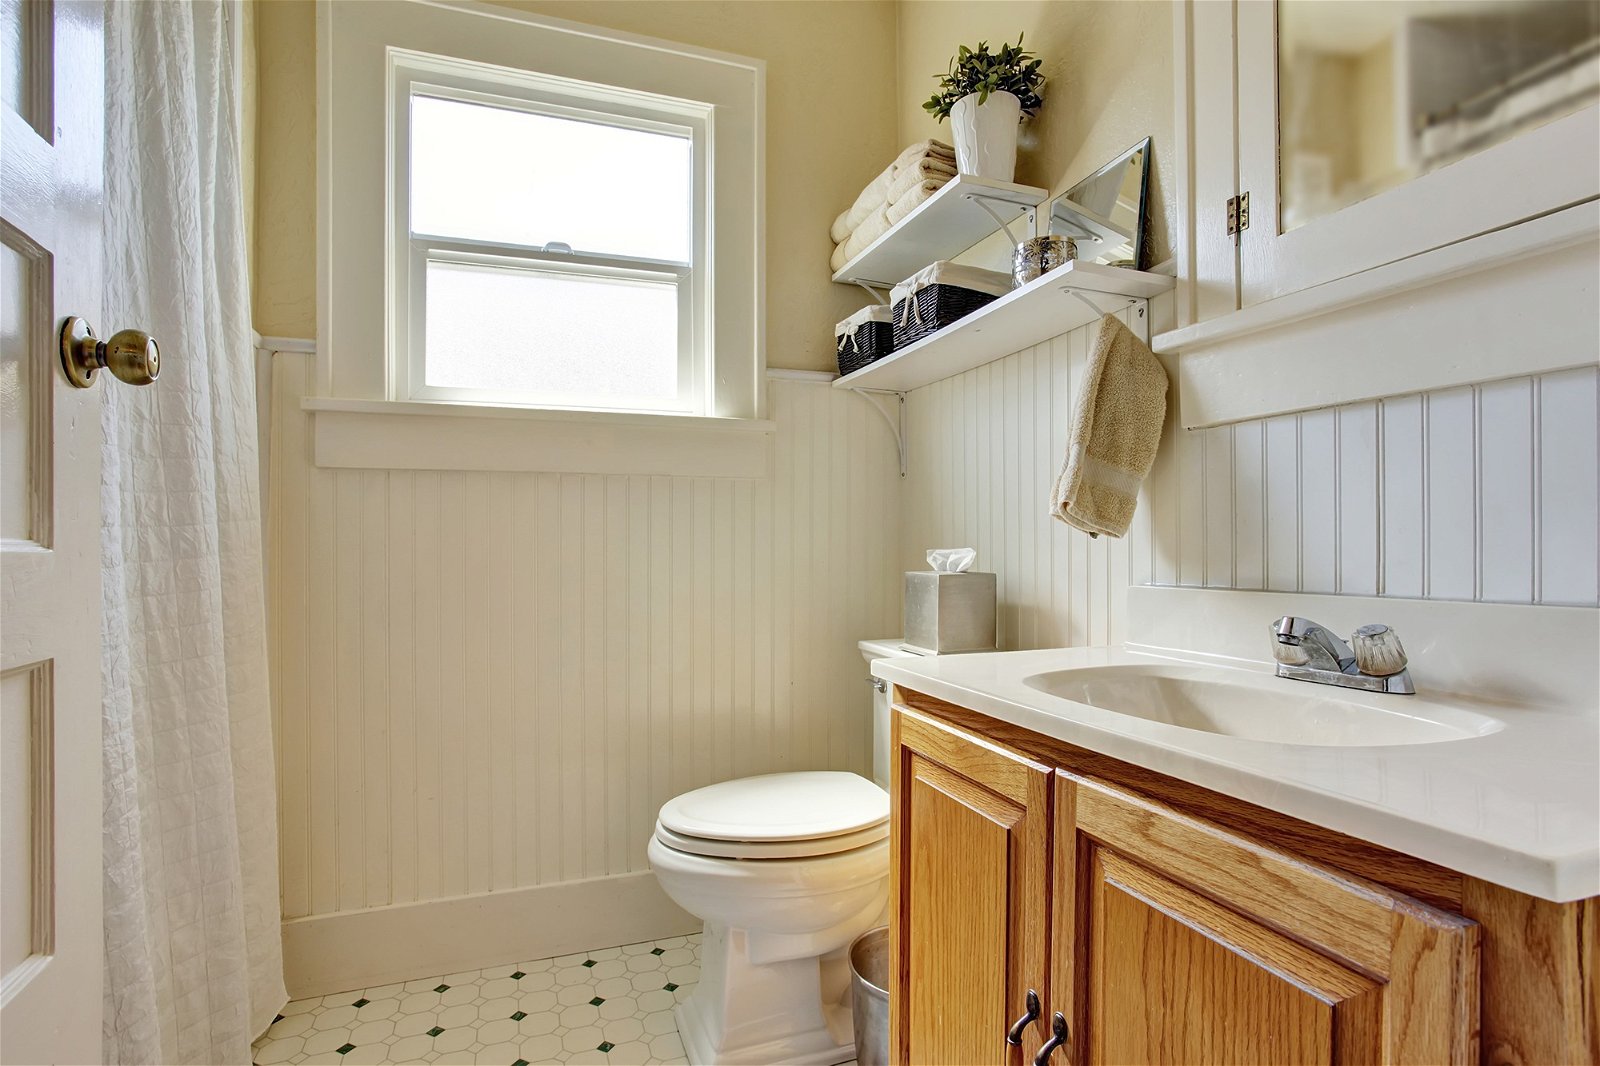 Bathroom design in creamy colors with brown wooden cabinet and small window. Decorated with plant pot on the shelf.